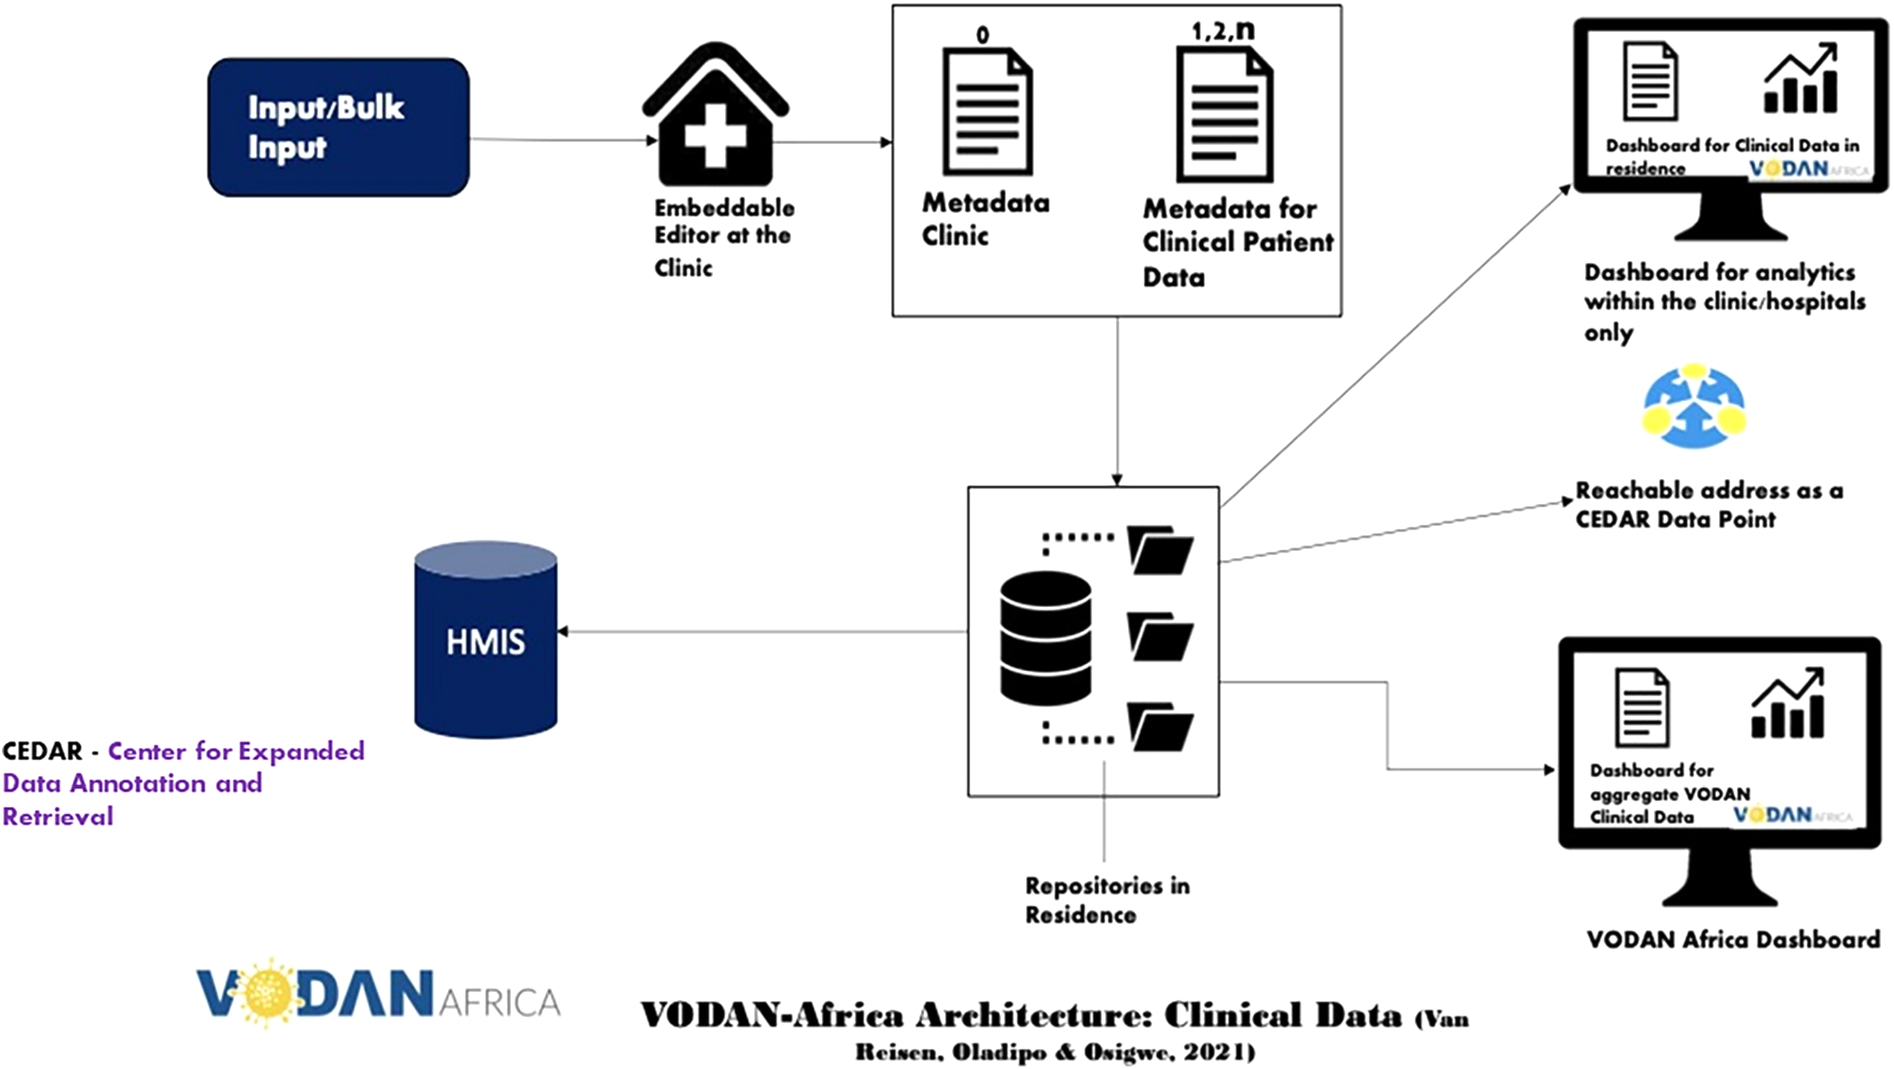 VODAN Africa architecture for clinical data.img.